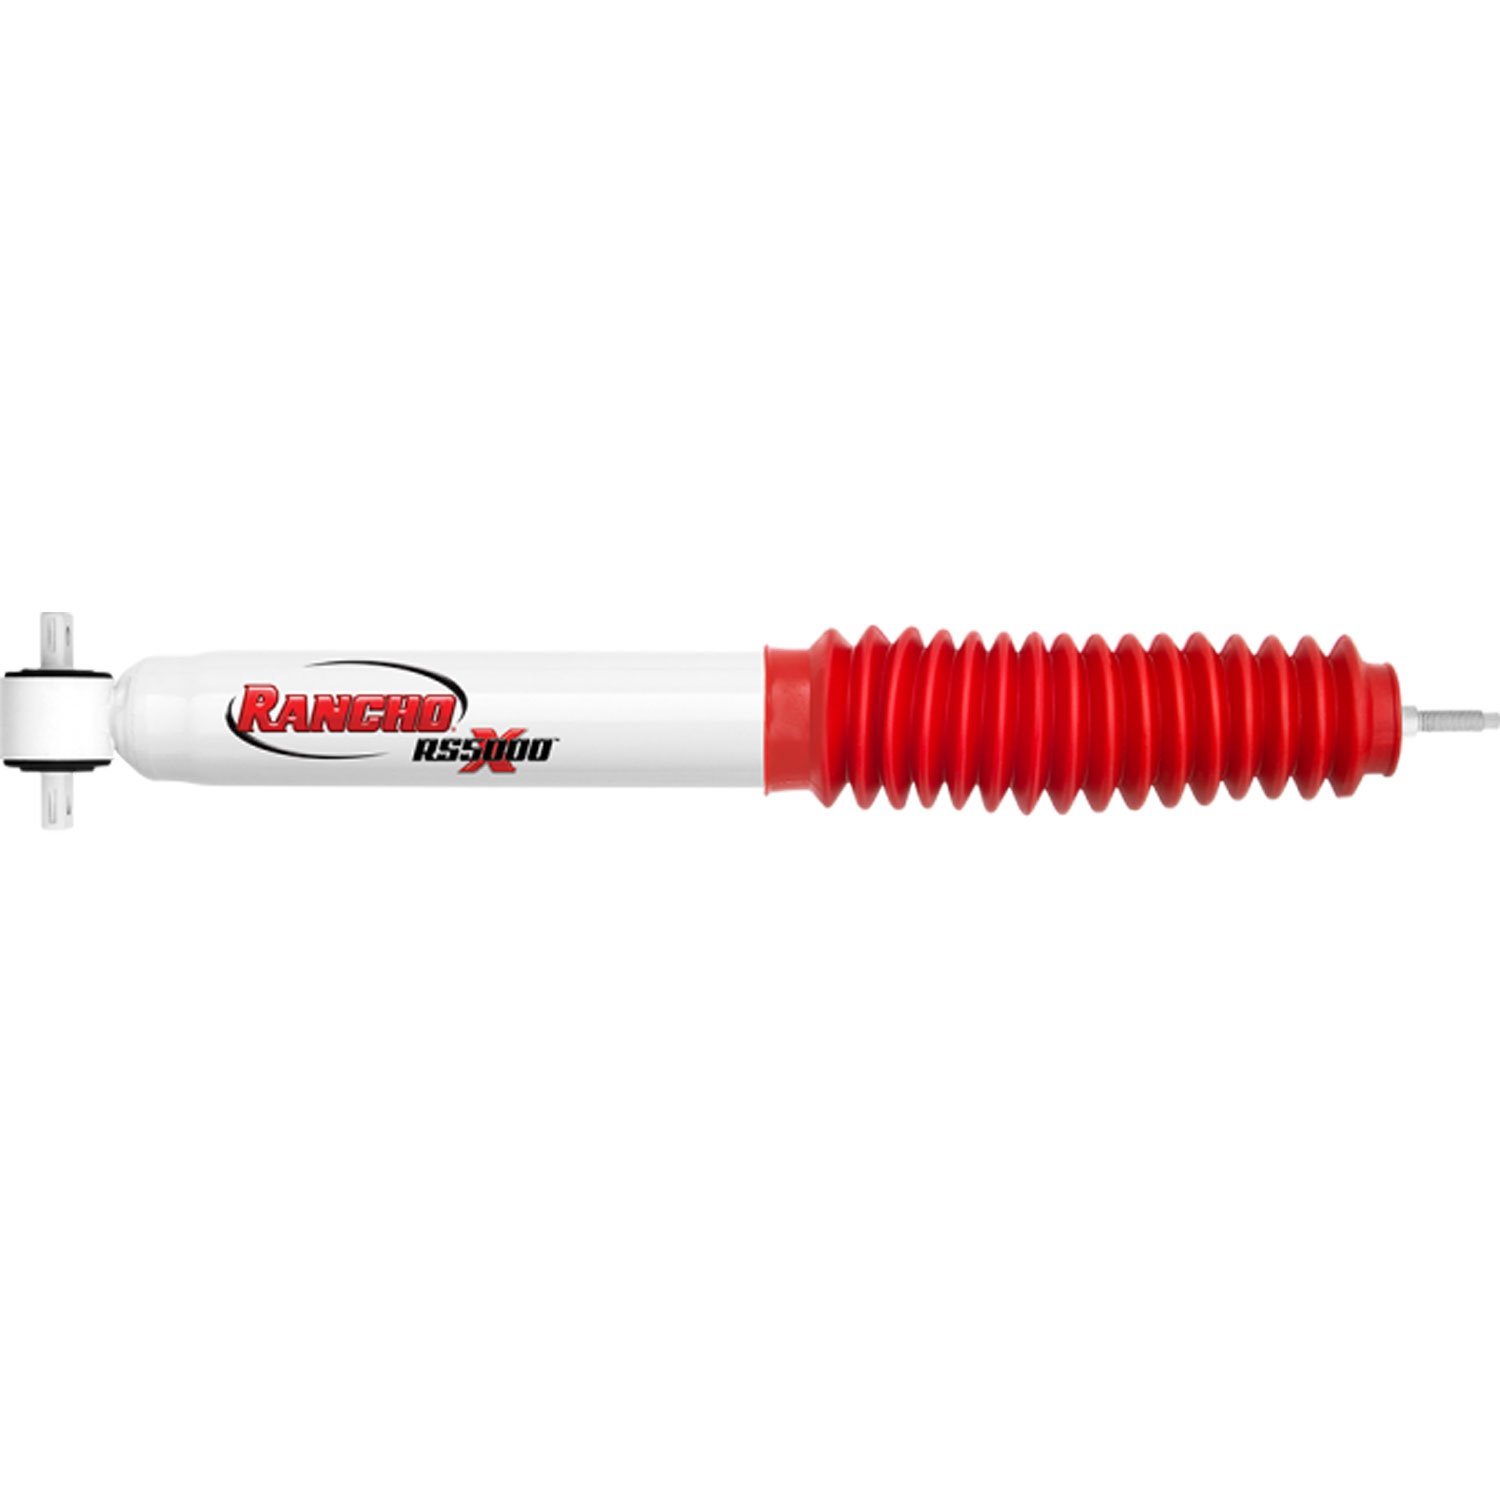 RS5000X Front Shock Absorber Fits Jeep Comanche, Cherokee, Grand Cherokee and Wrangler TJ